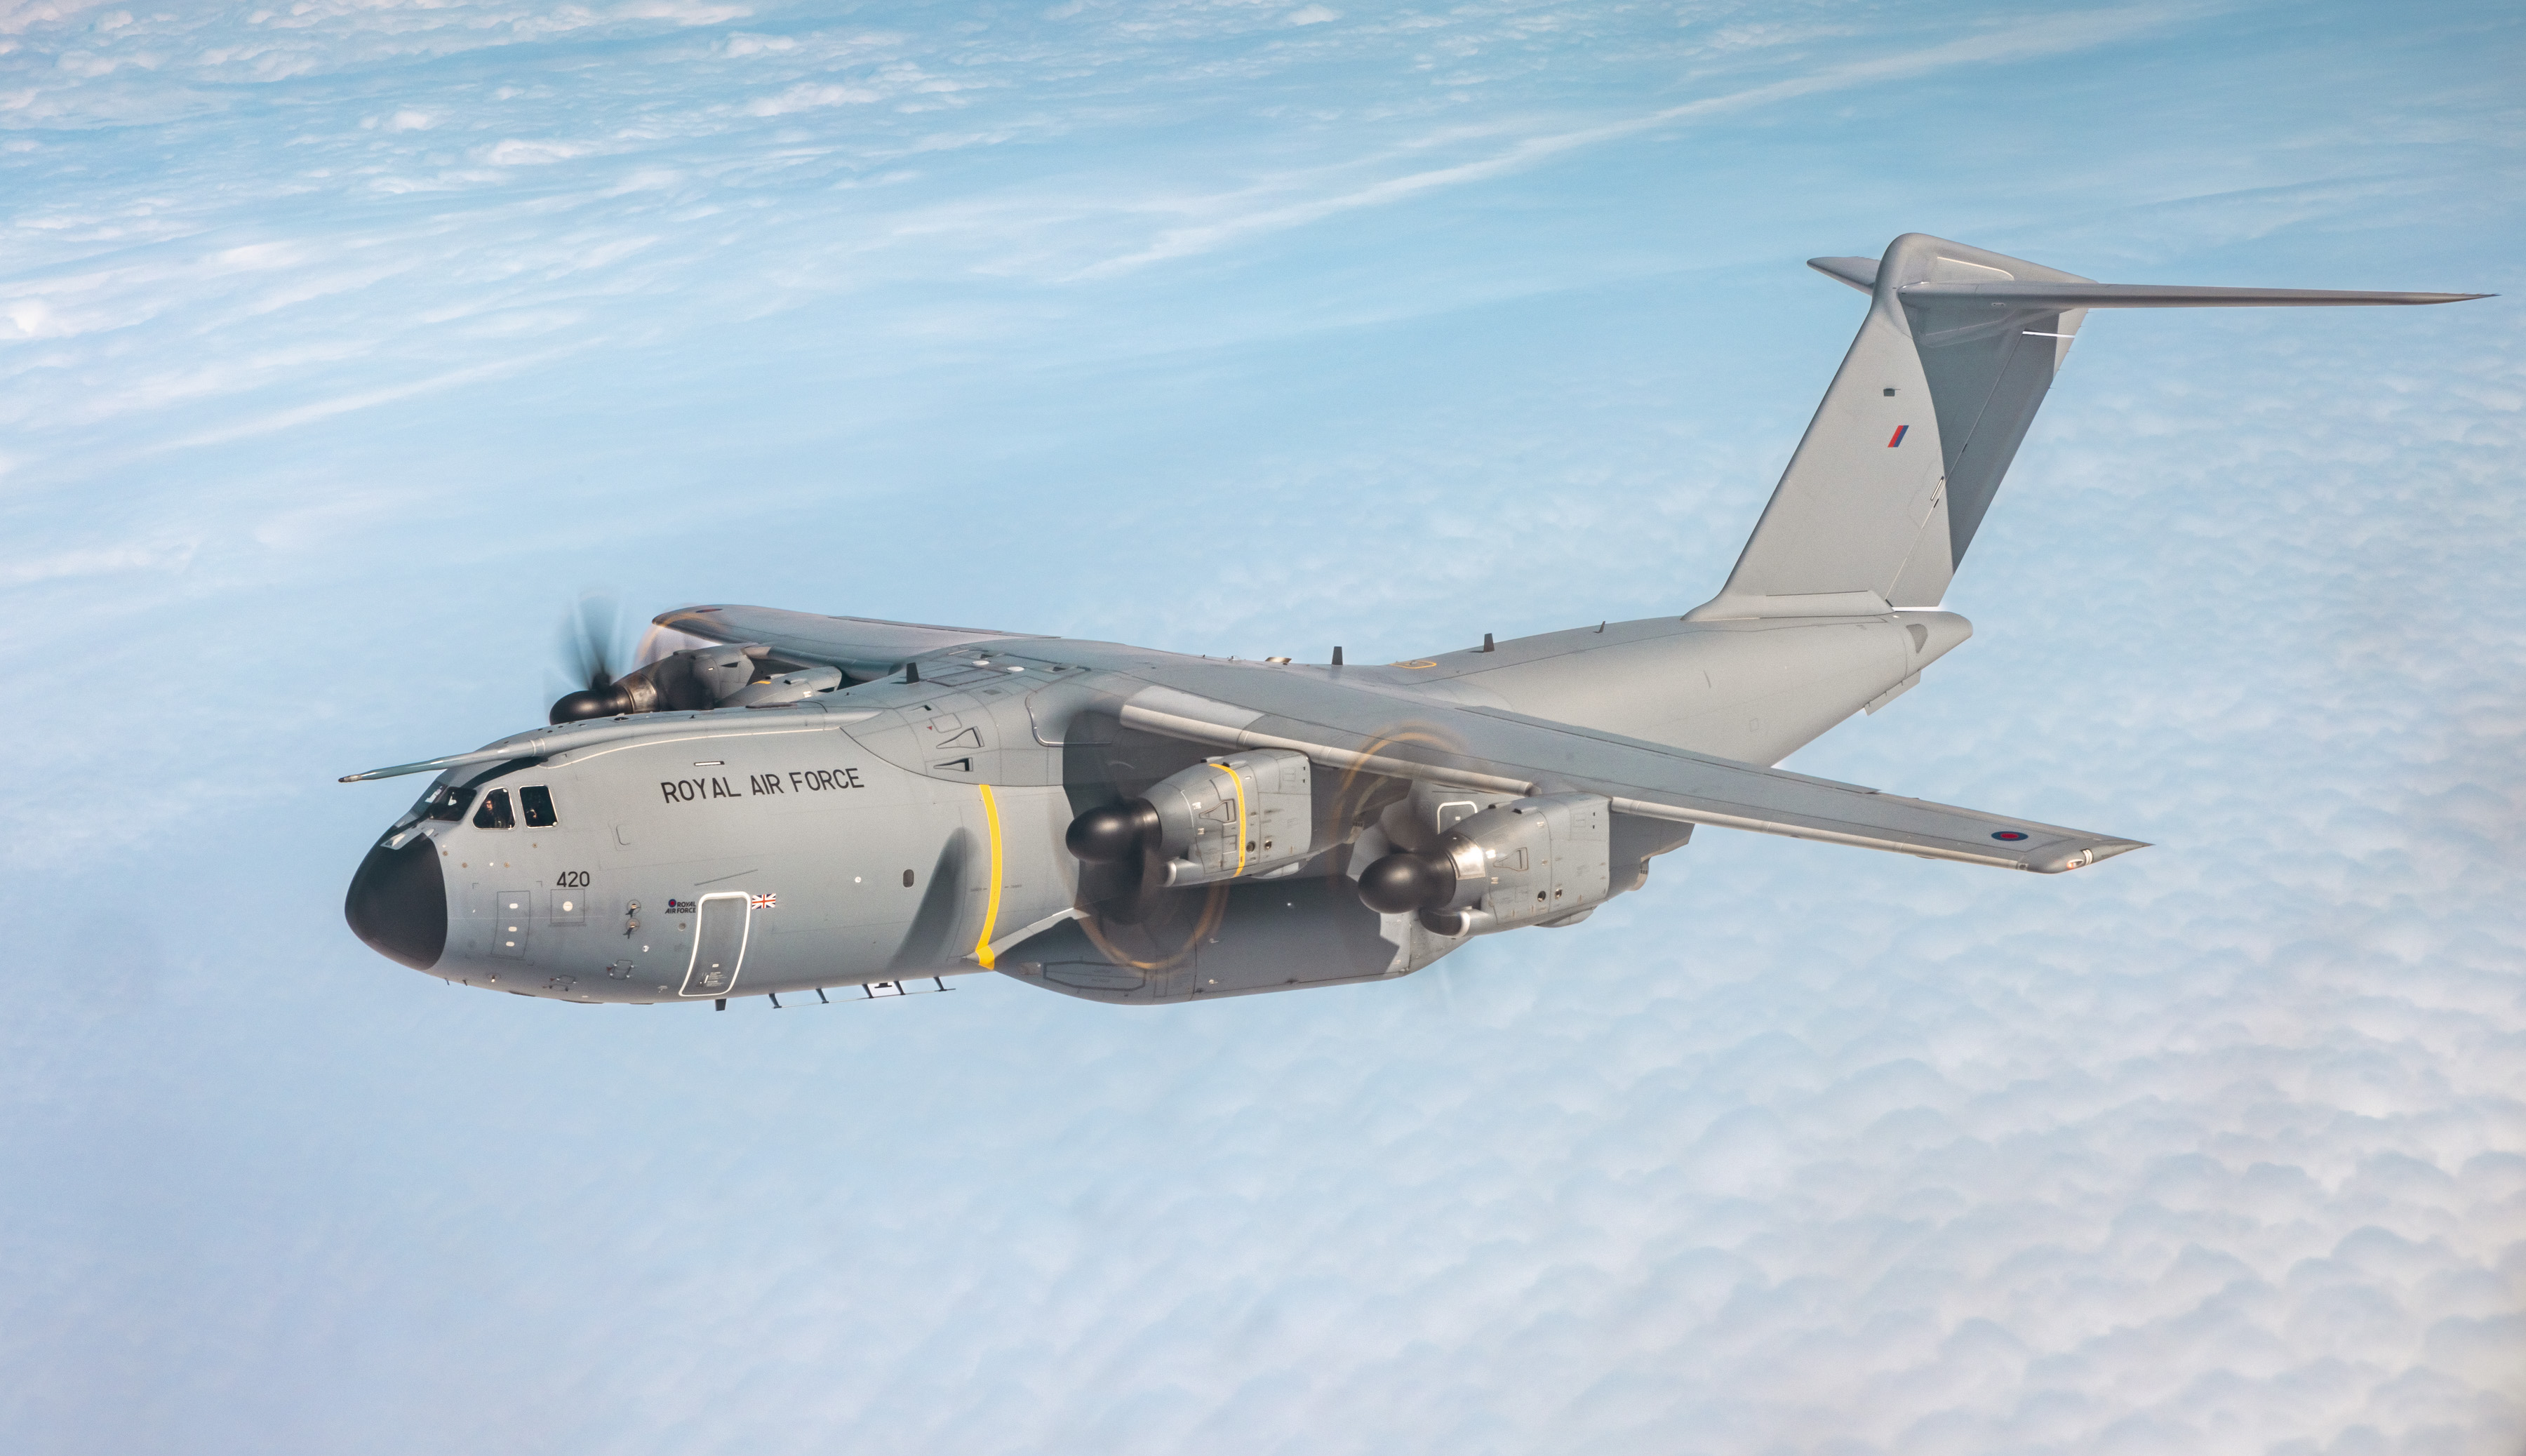 A400M flying against backdrop of bright blue skies and wispy clouds